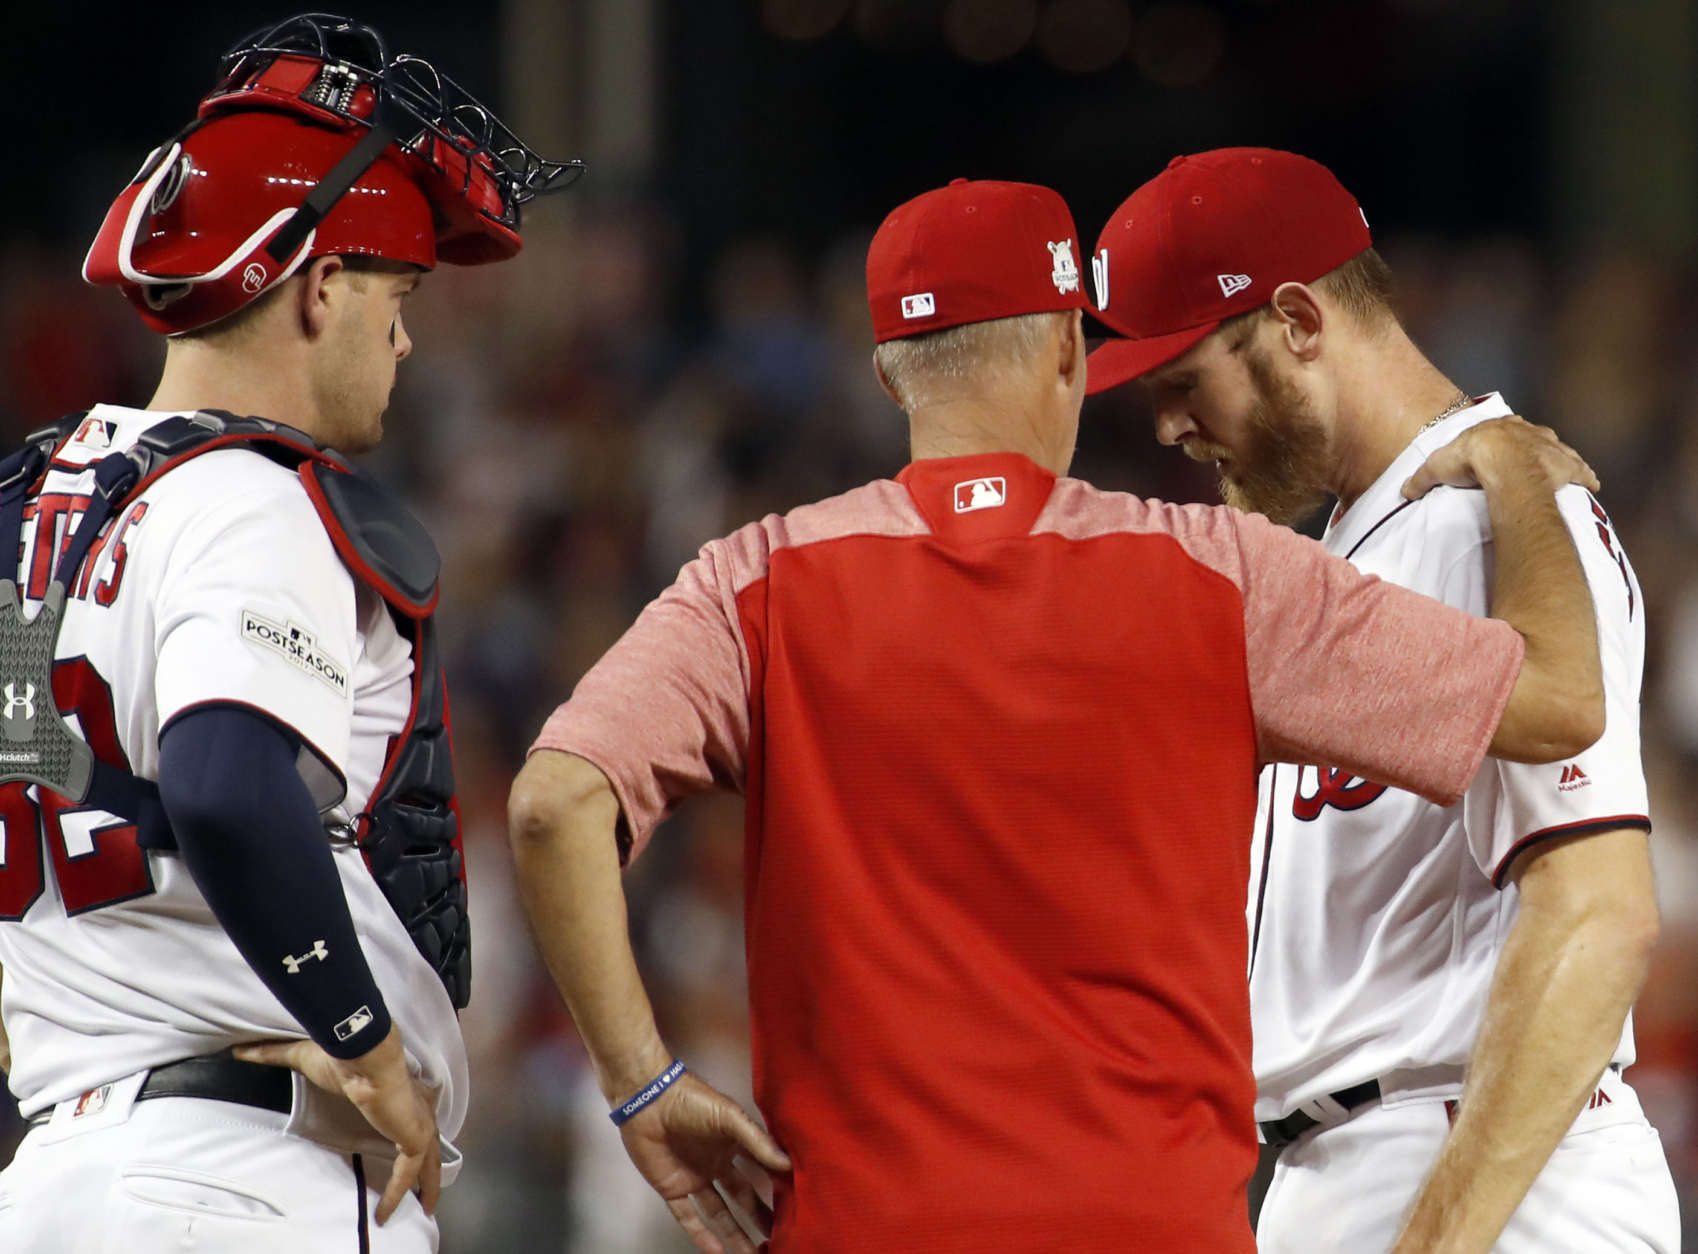 Washington Nationals catcher Matt Wieters,l left, and pitching coach Mike Maddux, center, talk with Washington Nationals starting pitcher Stephen Strasburg on the mound during Game 1 of baseball's National League Division Series against the Chicago Cubs, at Nationals Park, Friday, Oct. 6, 2017, in Washington. (AP Photo/Alex Brandon)